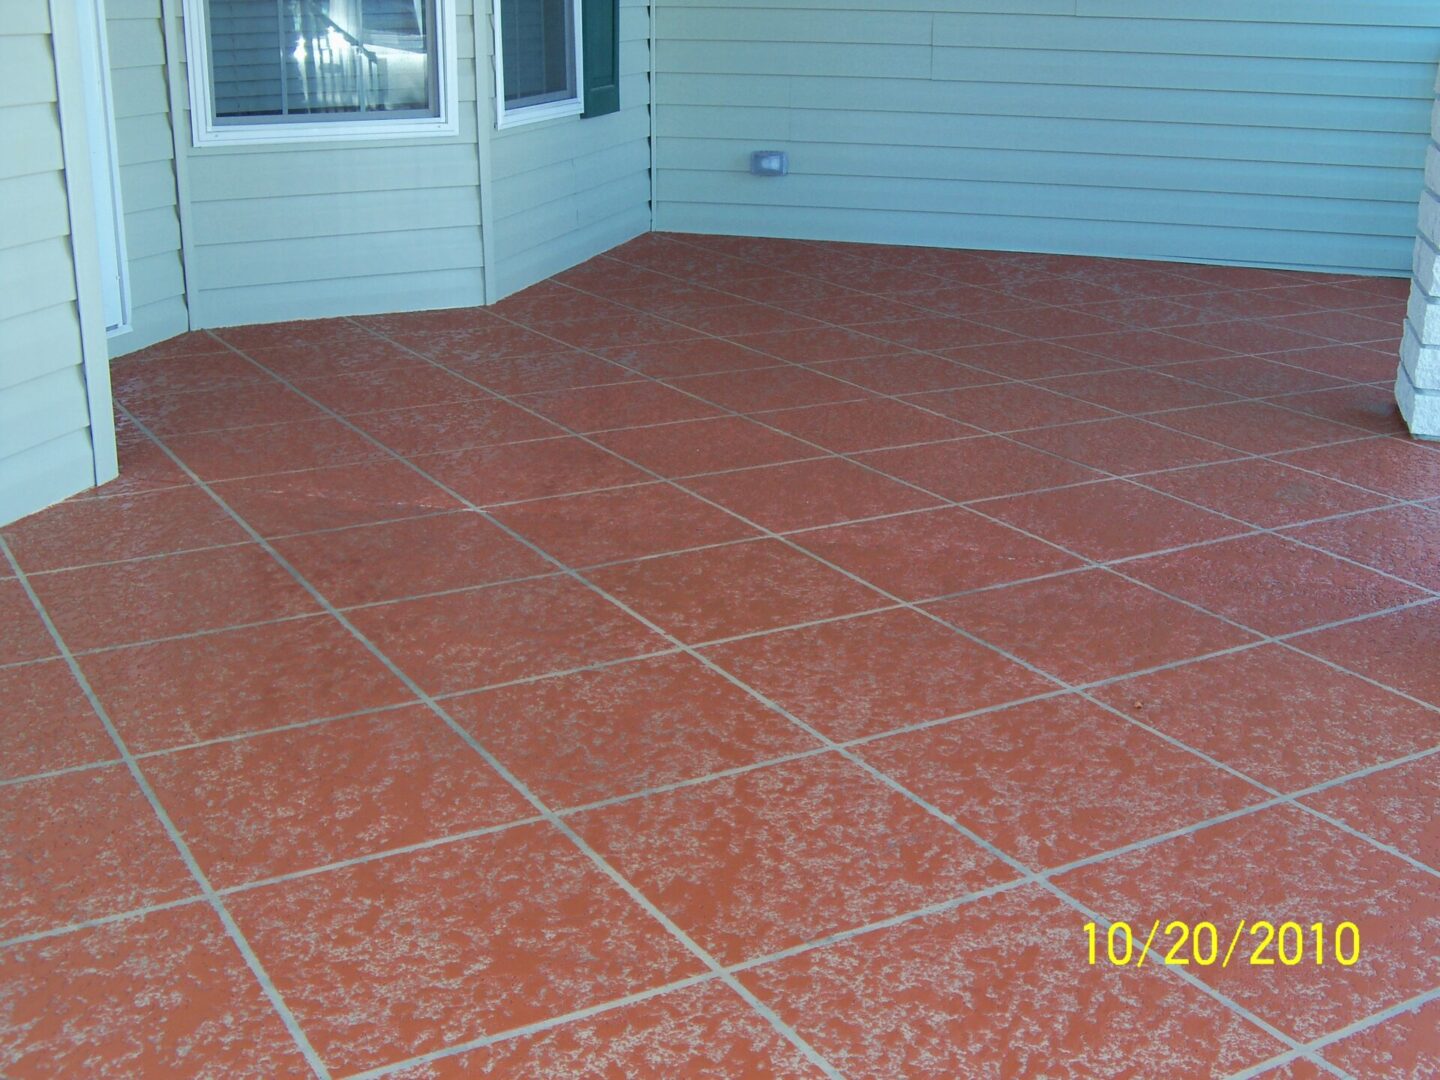 Patio floor with knock down texture